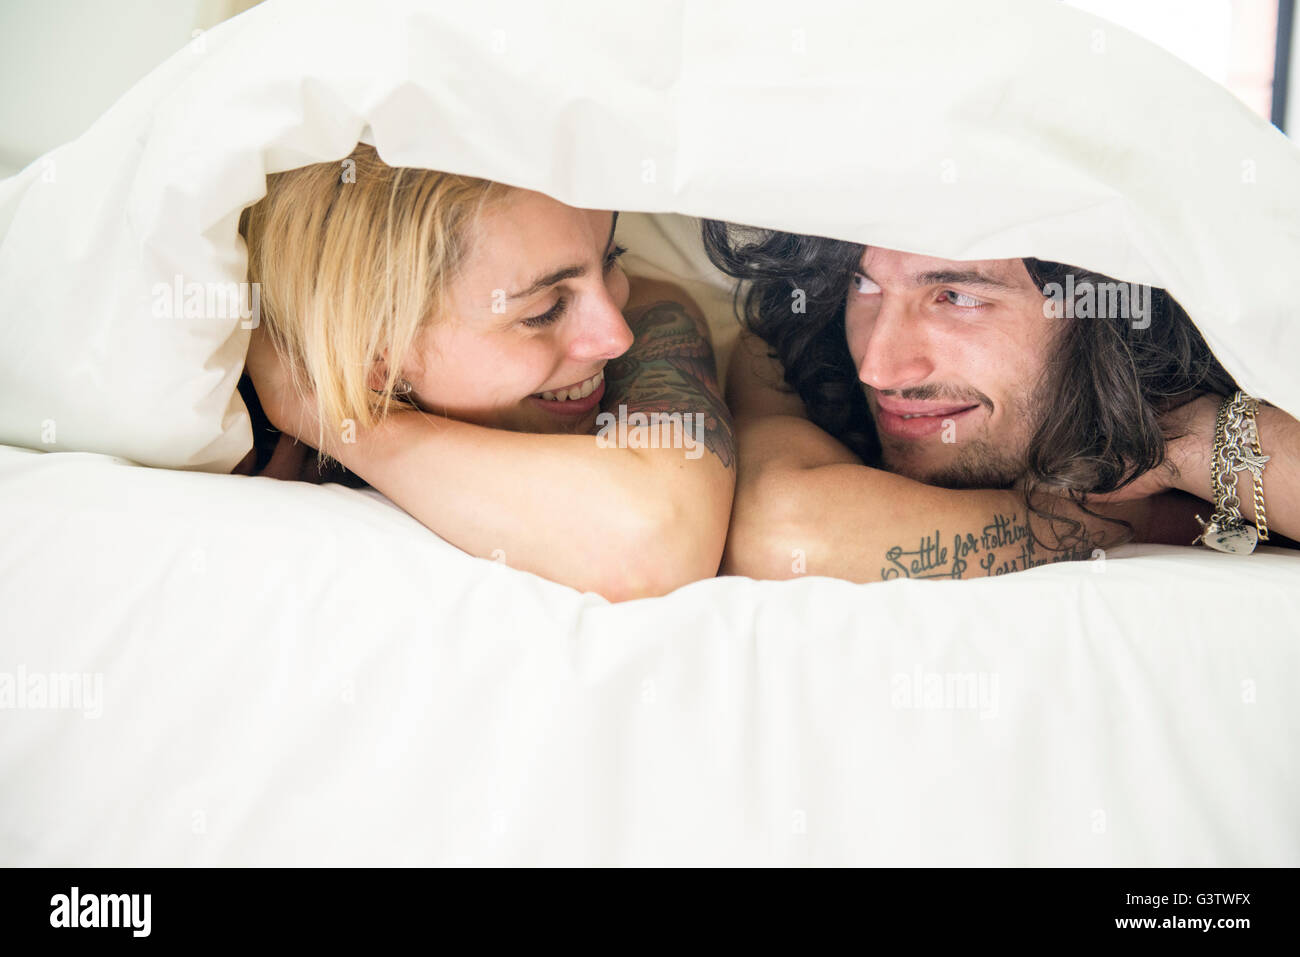 A cool young tattooed couple peeking out from under a duvet on a bed. Stock Photo